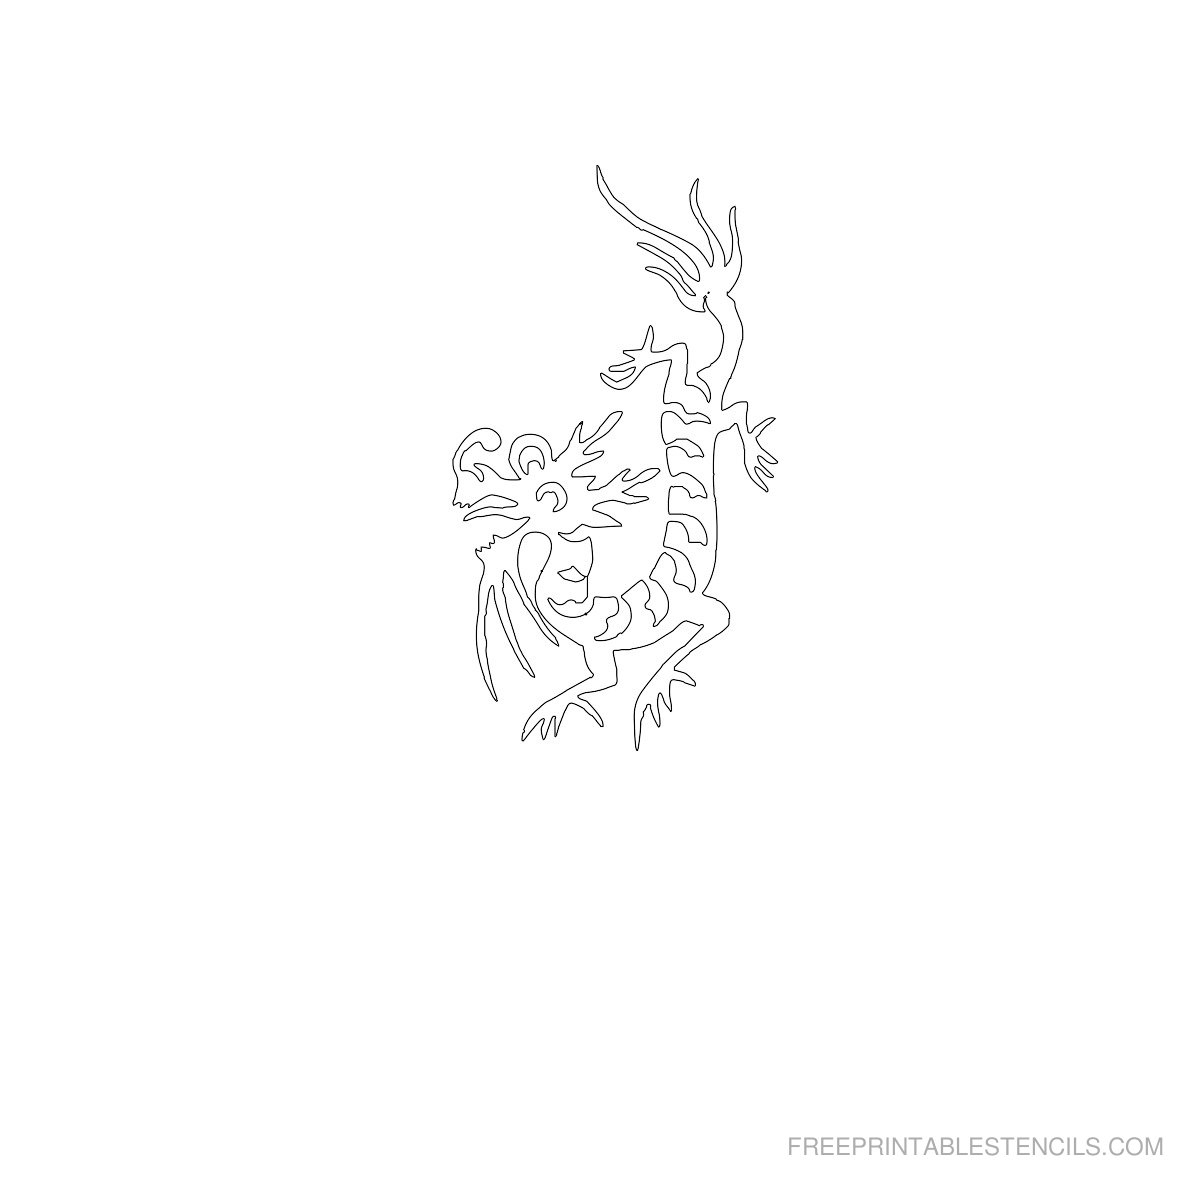 Dragon Stencils Printable Pictures | Free Printable Stencils - Free Printable Dragon Stencils